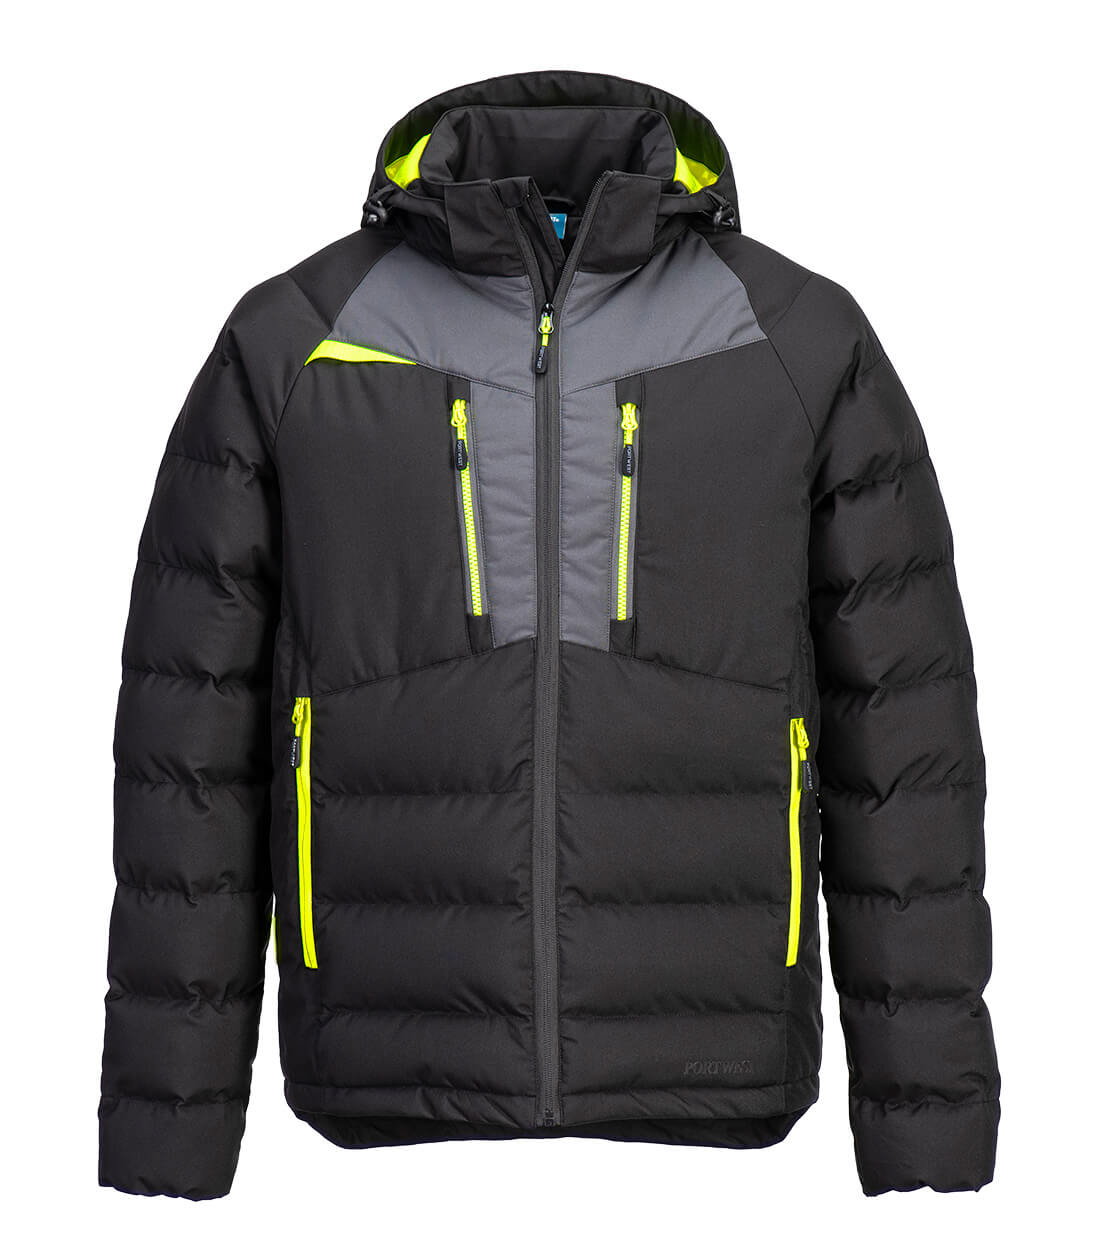 DX4 Insulated Jacket